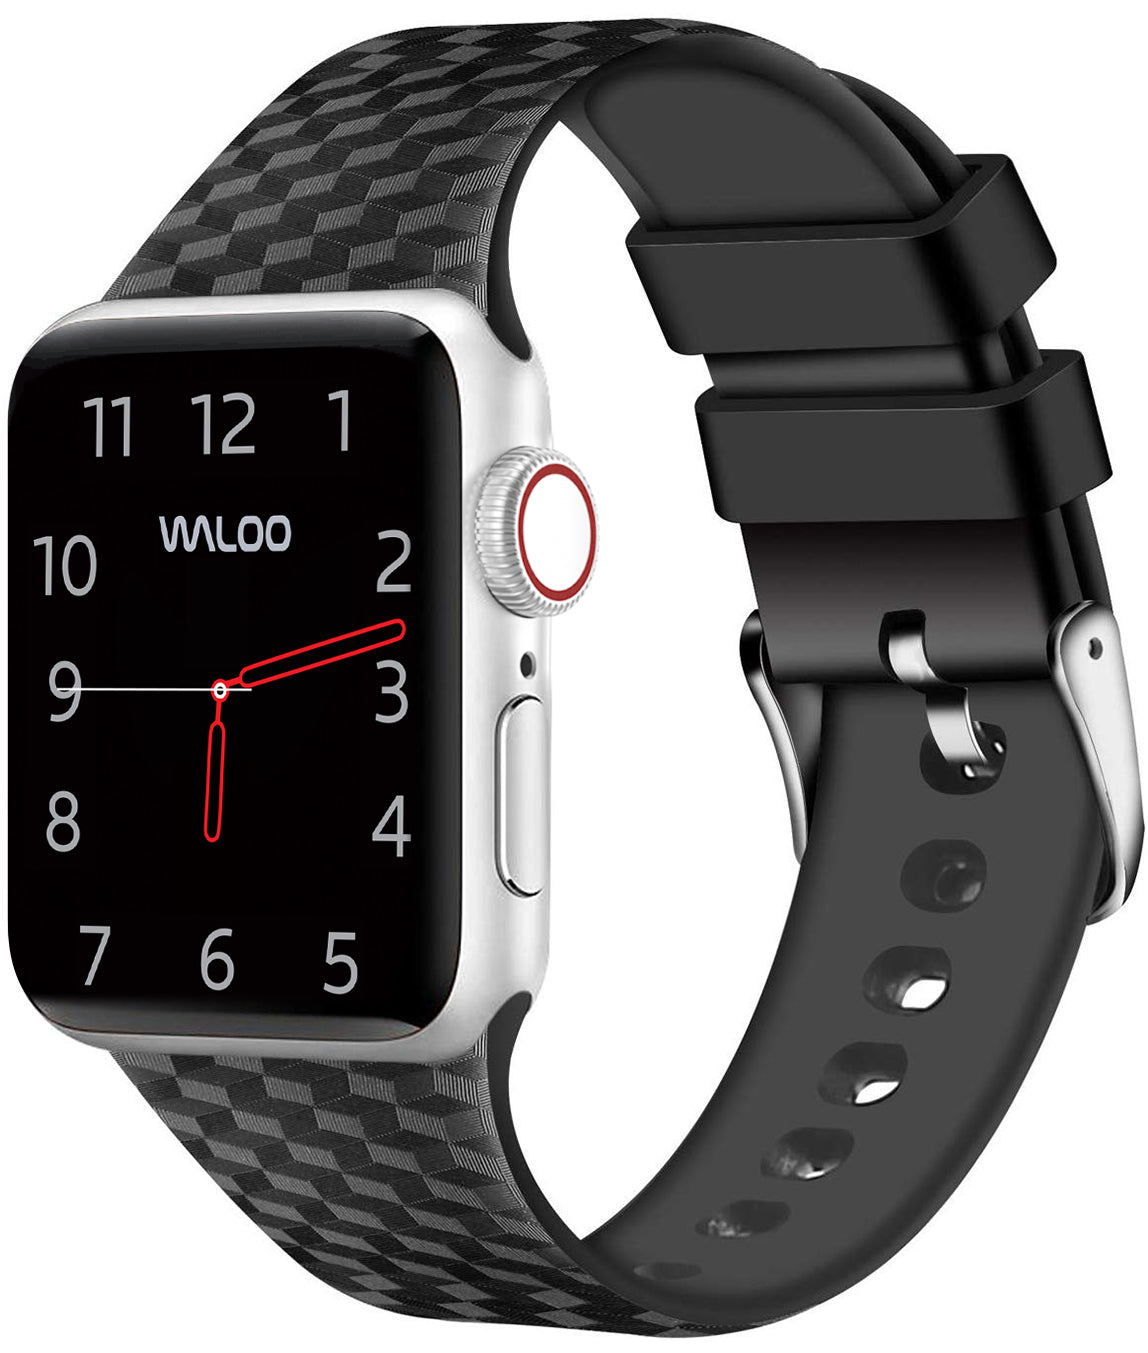 Waloo Carbon Fiber Silicone Band For Apple Watch